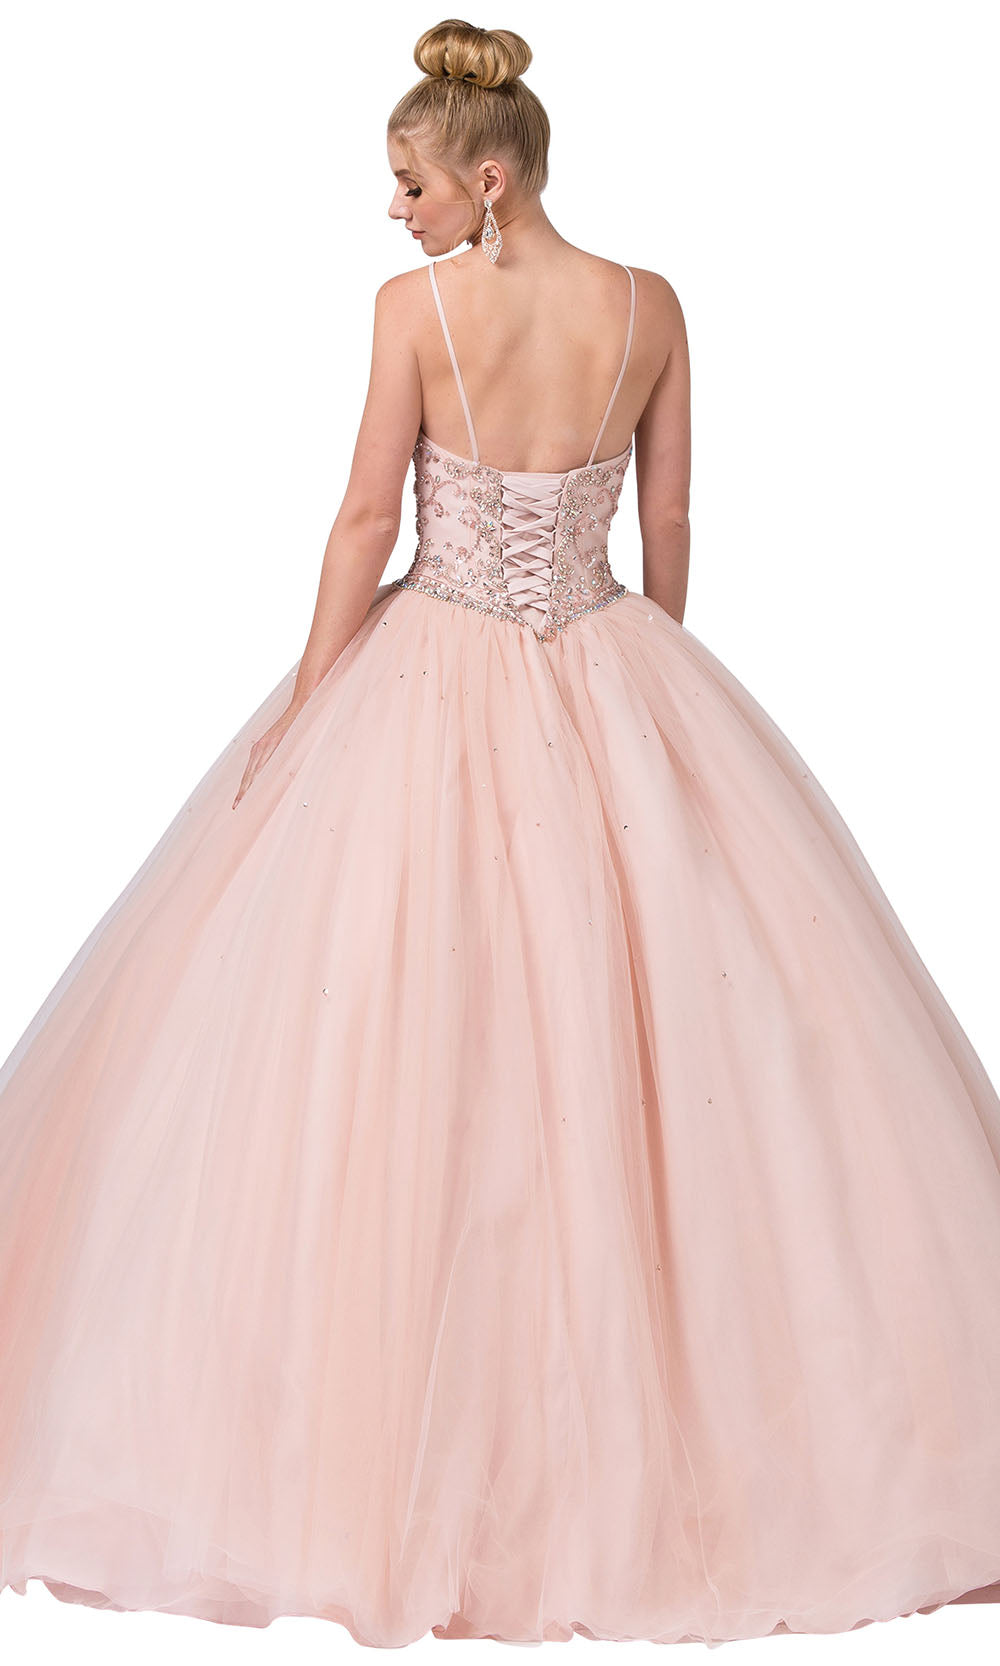 Dancing Queen - 1349 Thin Strapped Halter Ballgown In Pink